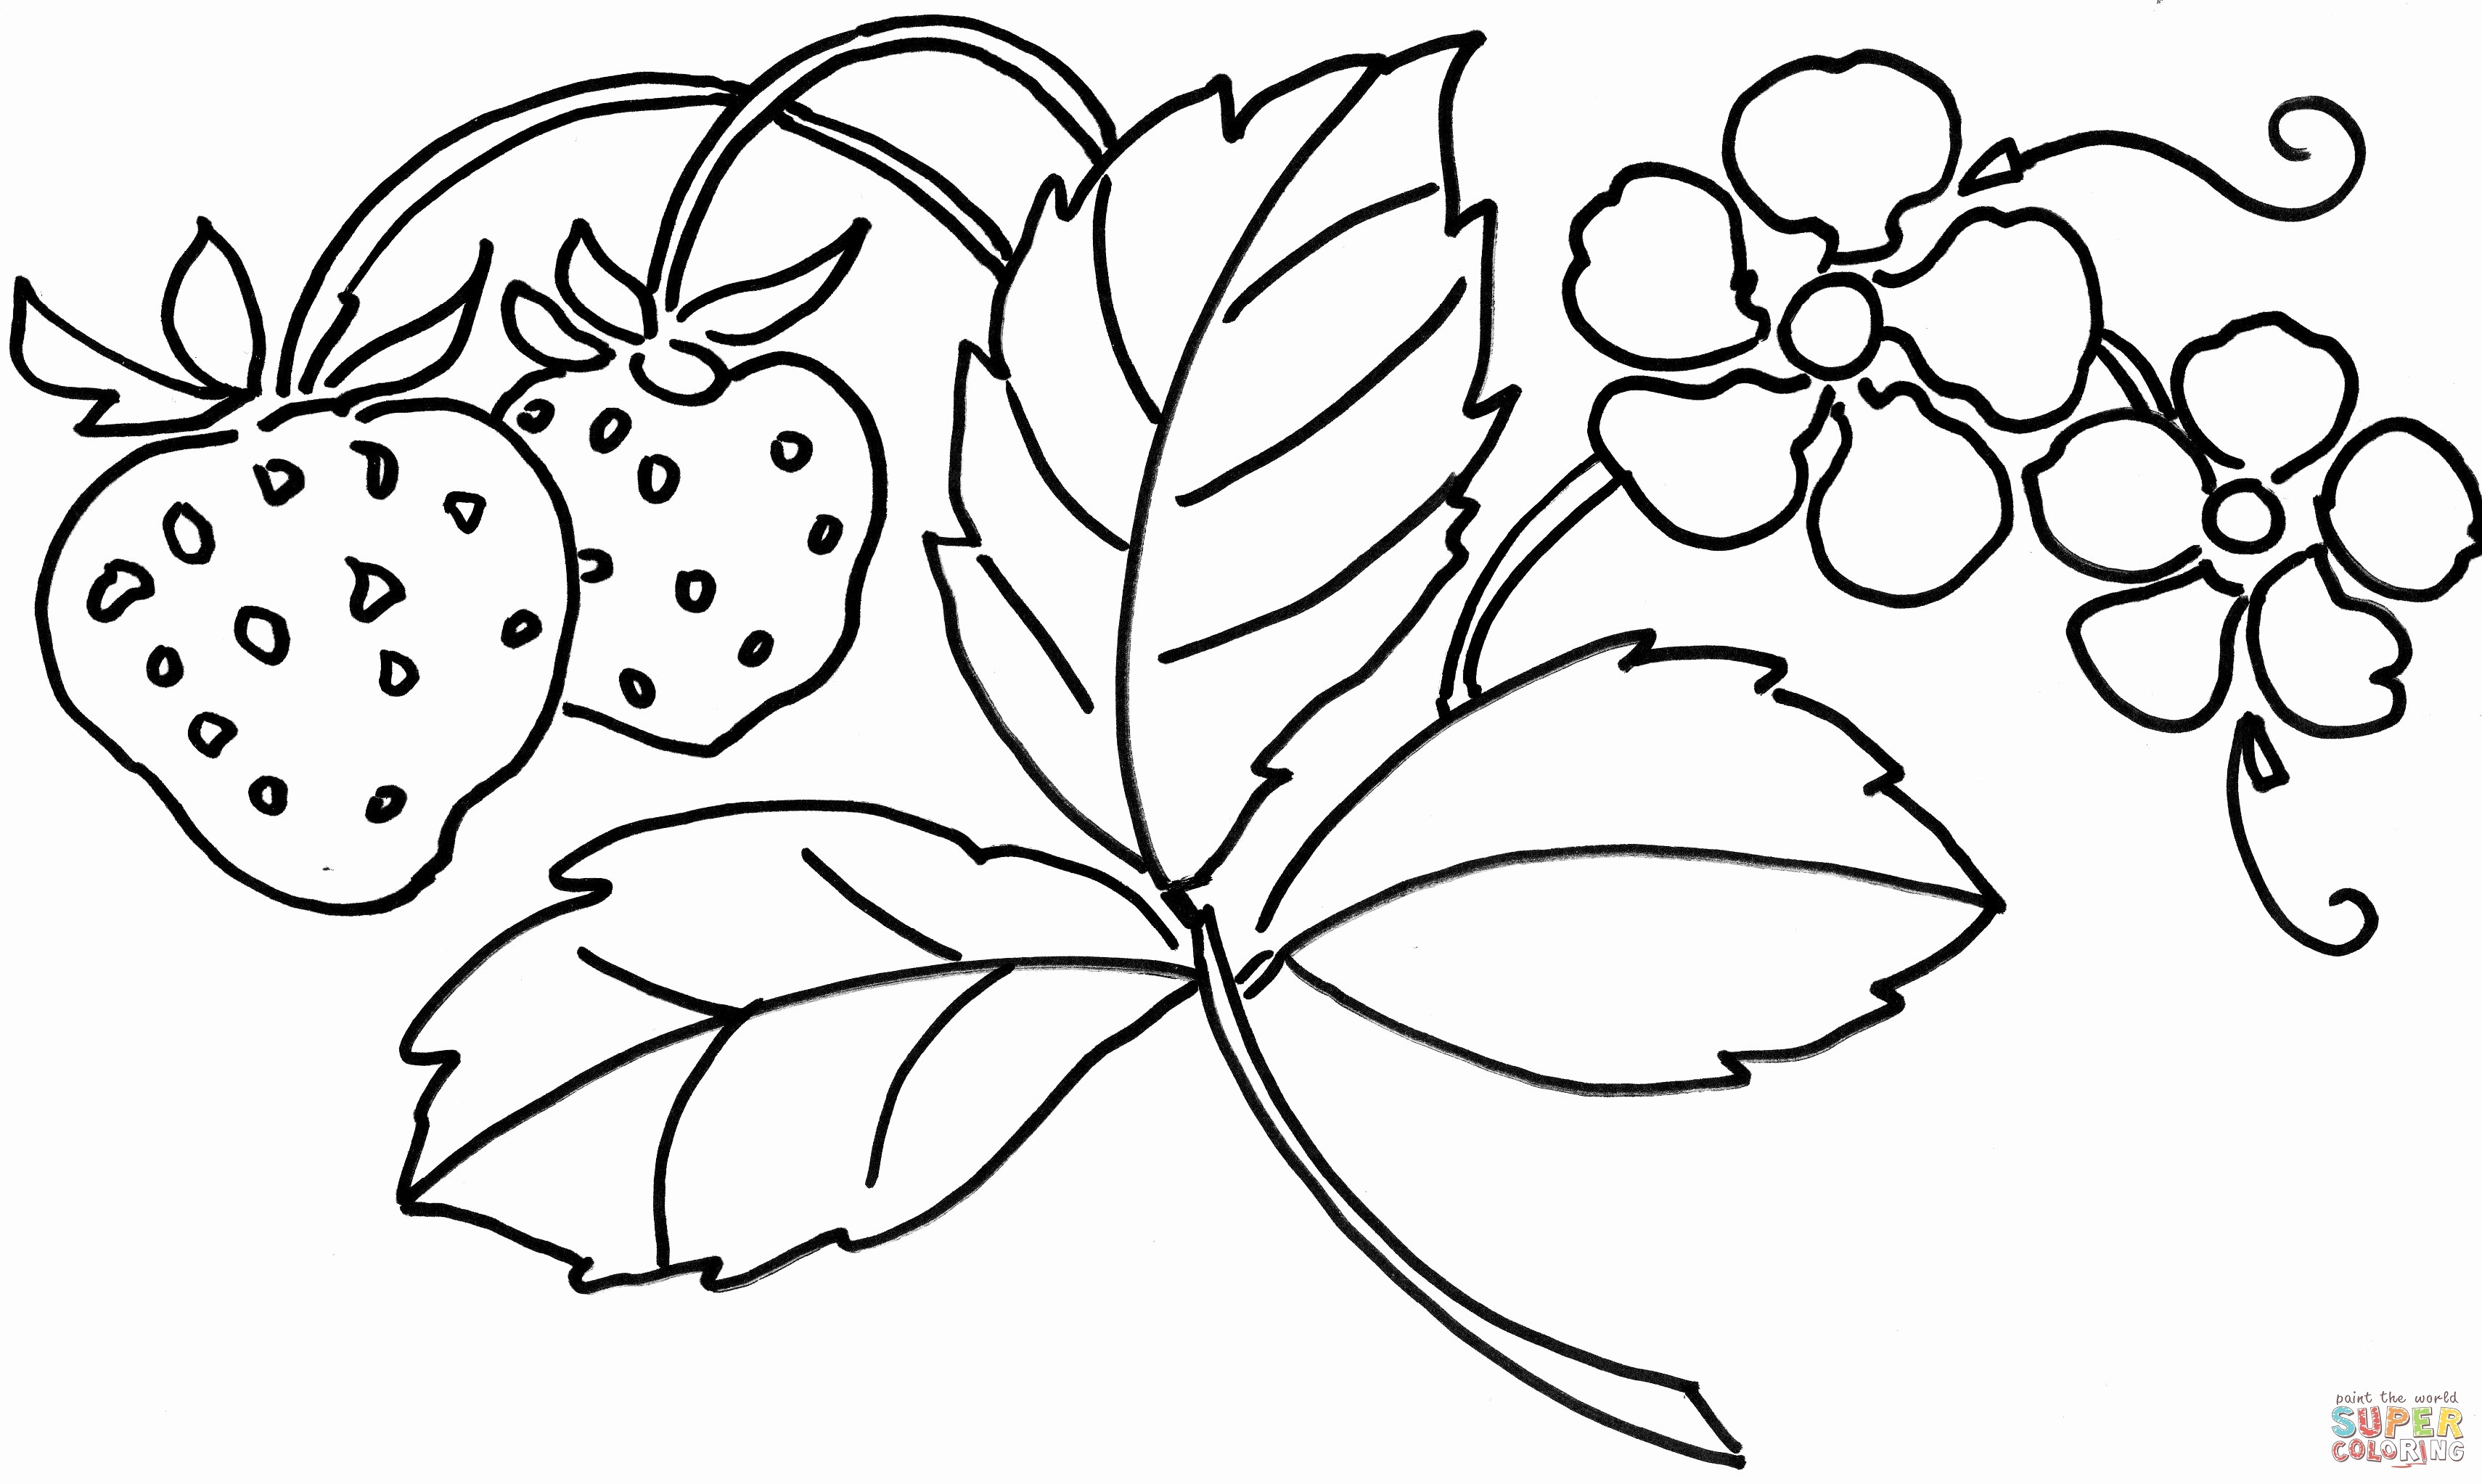 12 Famous Picture Of A Flower Vase to Color 2024 free download picture of a flower vase to color of coloring pages of spongebob inspirational cool vases flower vase in coloring pages of spongebob inspirational cool vases flower vase coloring page pages 